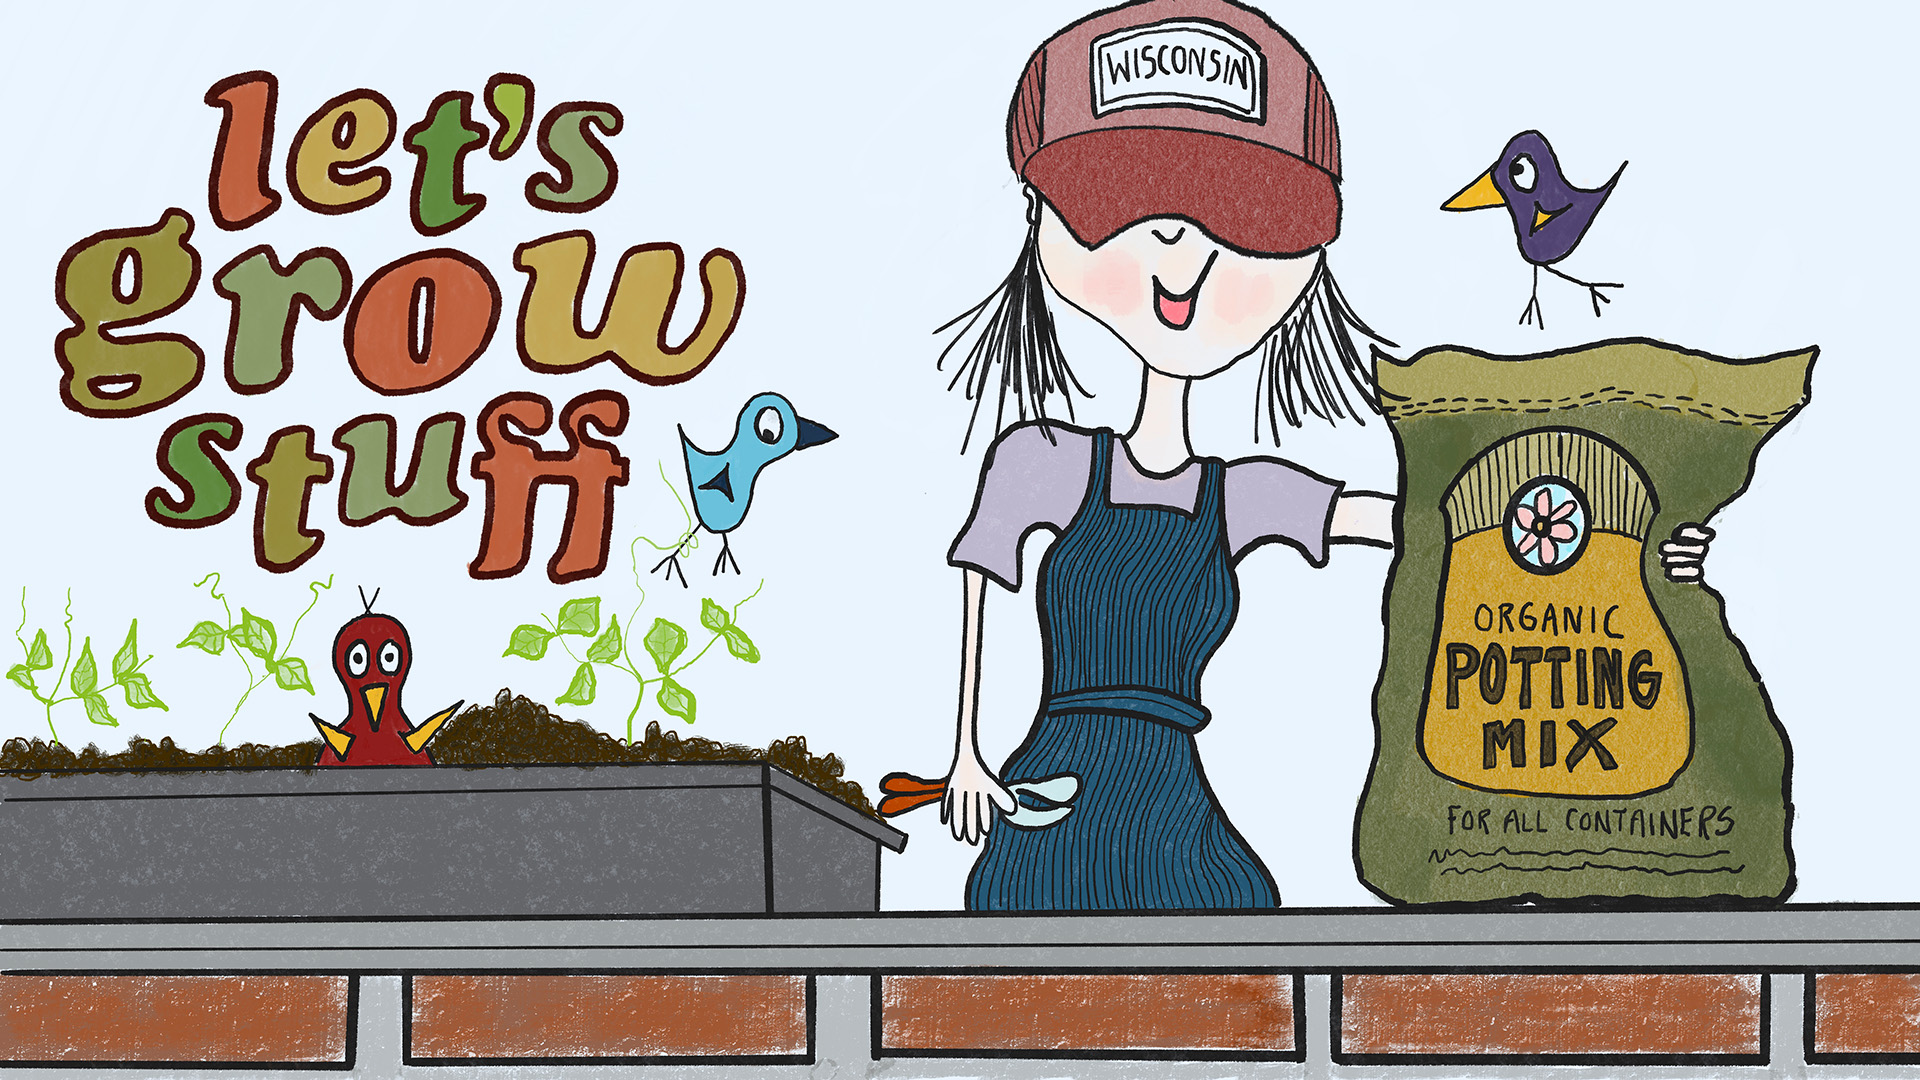 A colorful cartoon illustration of a gardener standing on a balcony, holding a bag of potting mix with three birds nearby